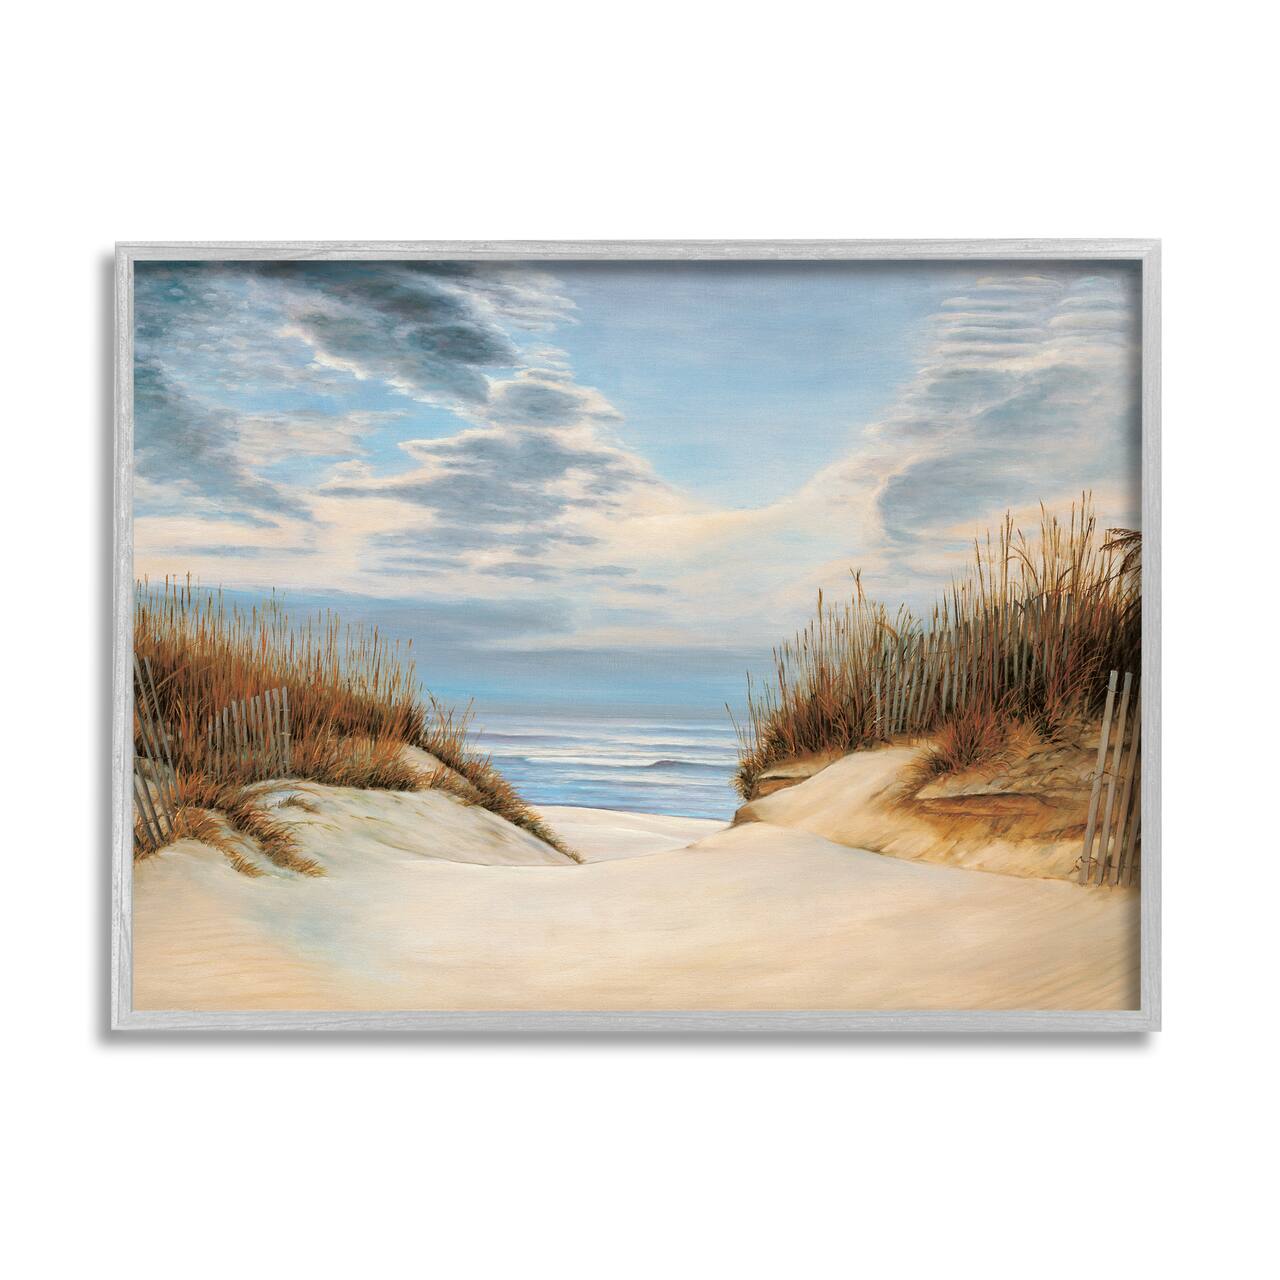 Stupell Industries Alluring Cloudy Beach Path Wooden Fence Tall Grass in Gray Frame Wall Art